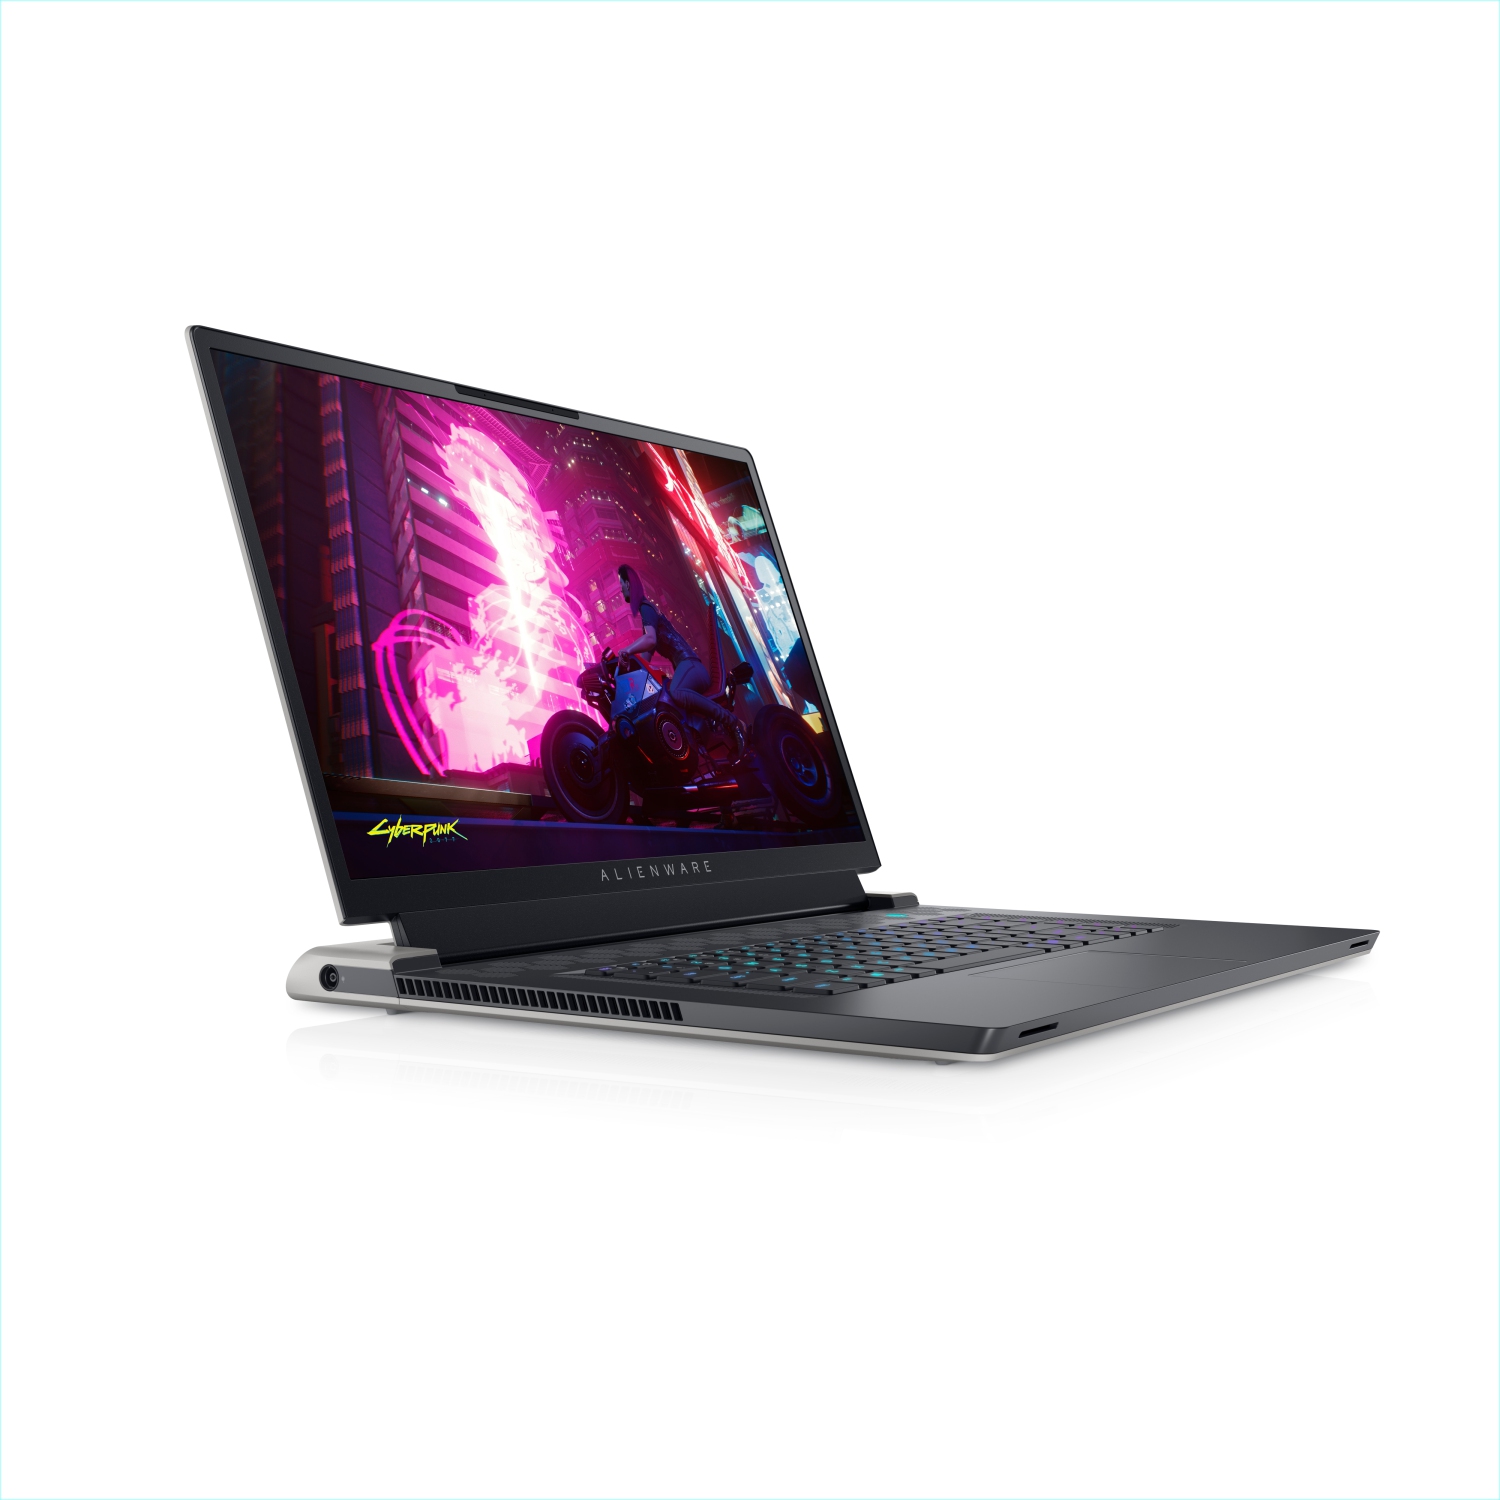 Refurbished (Excellent) - Dell Alienware X17 R1 Gaming Laptop (2021), 17.3" FHD, Core i7, 256GB SSD, 32GB RAM, RTX 3060, 8 Cores @ 4.6 GHz, 11th Gen CPU Certified